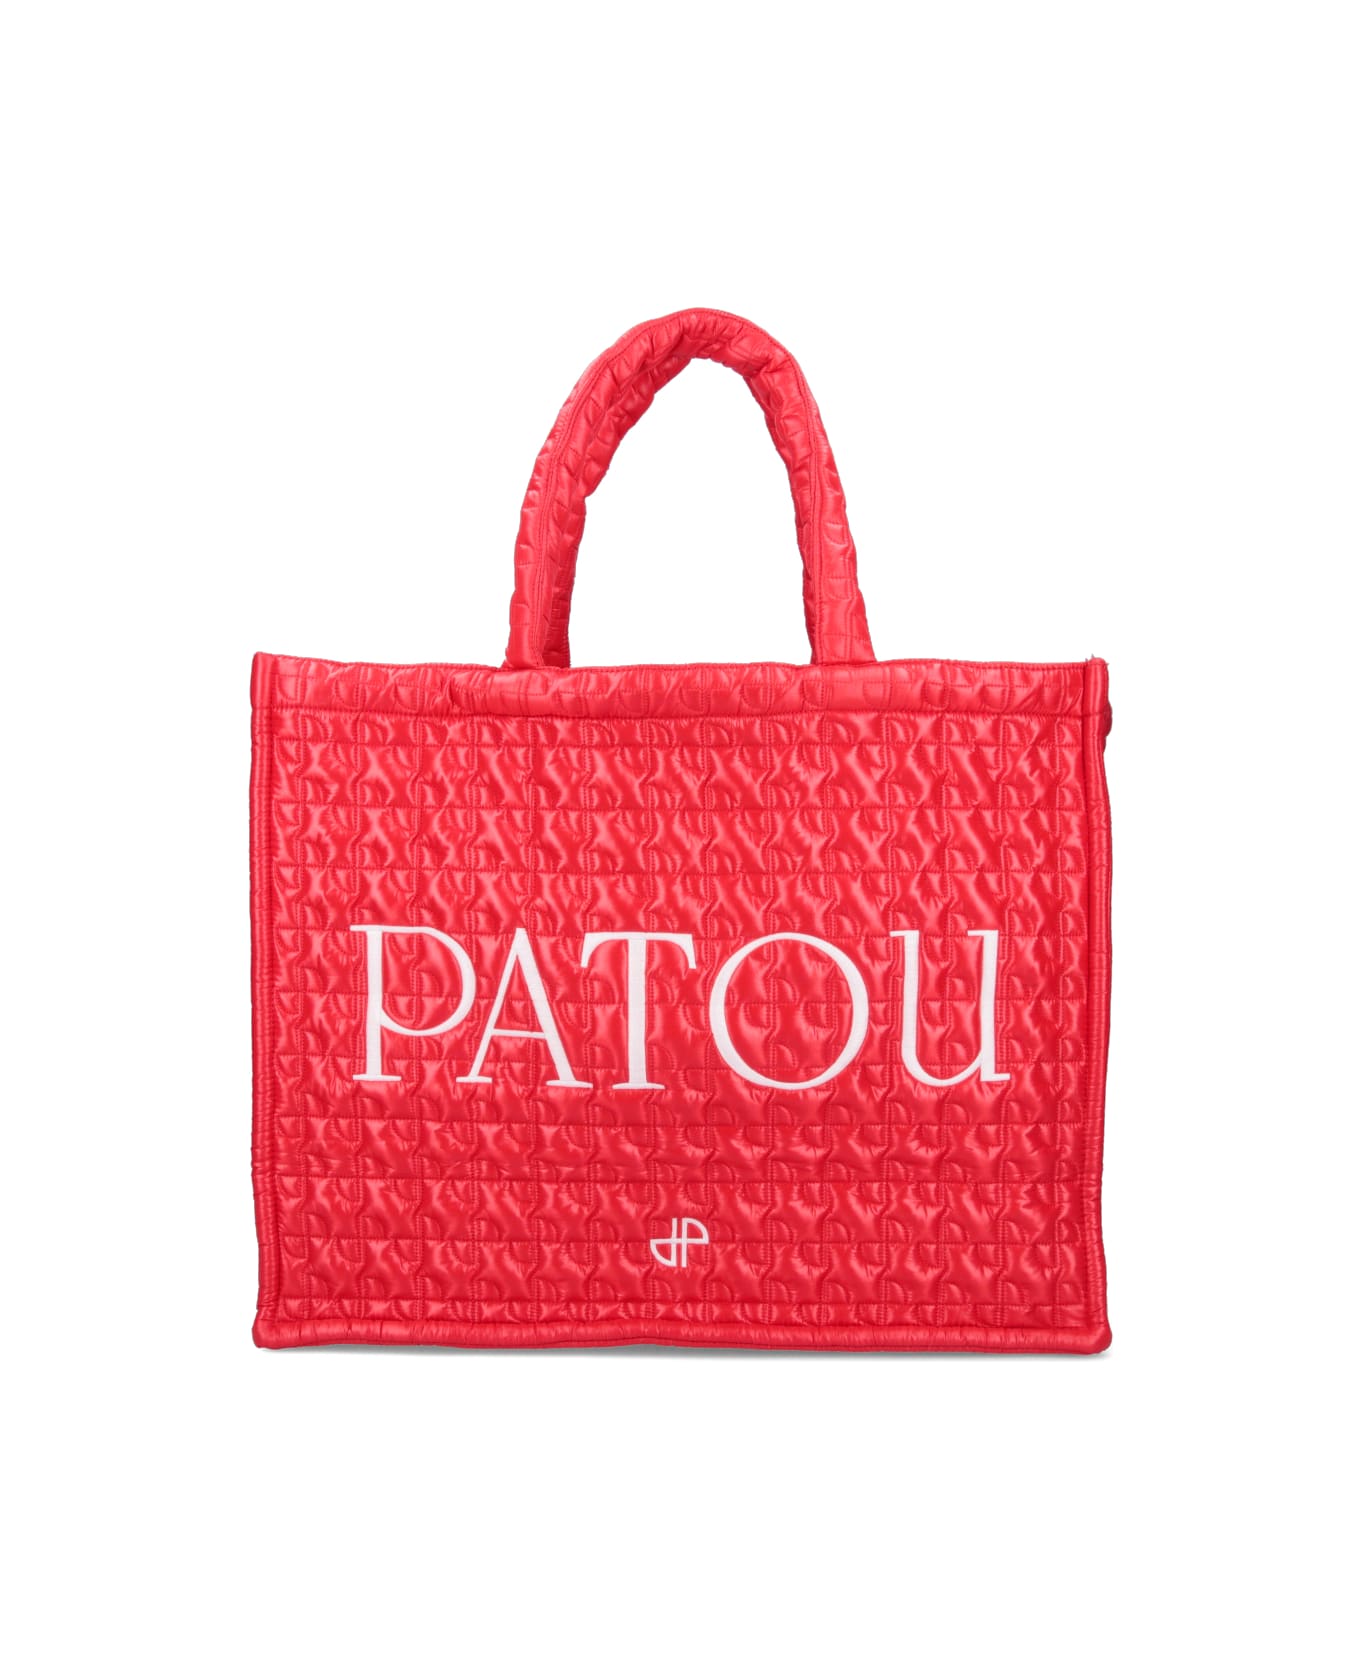 Patou Quilted Tote Bag - Red